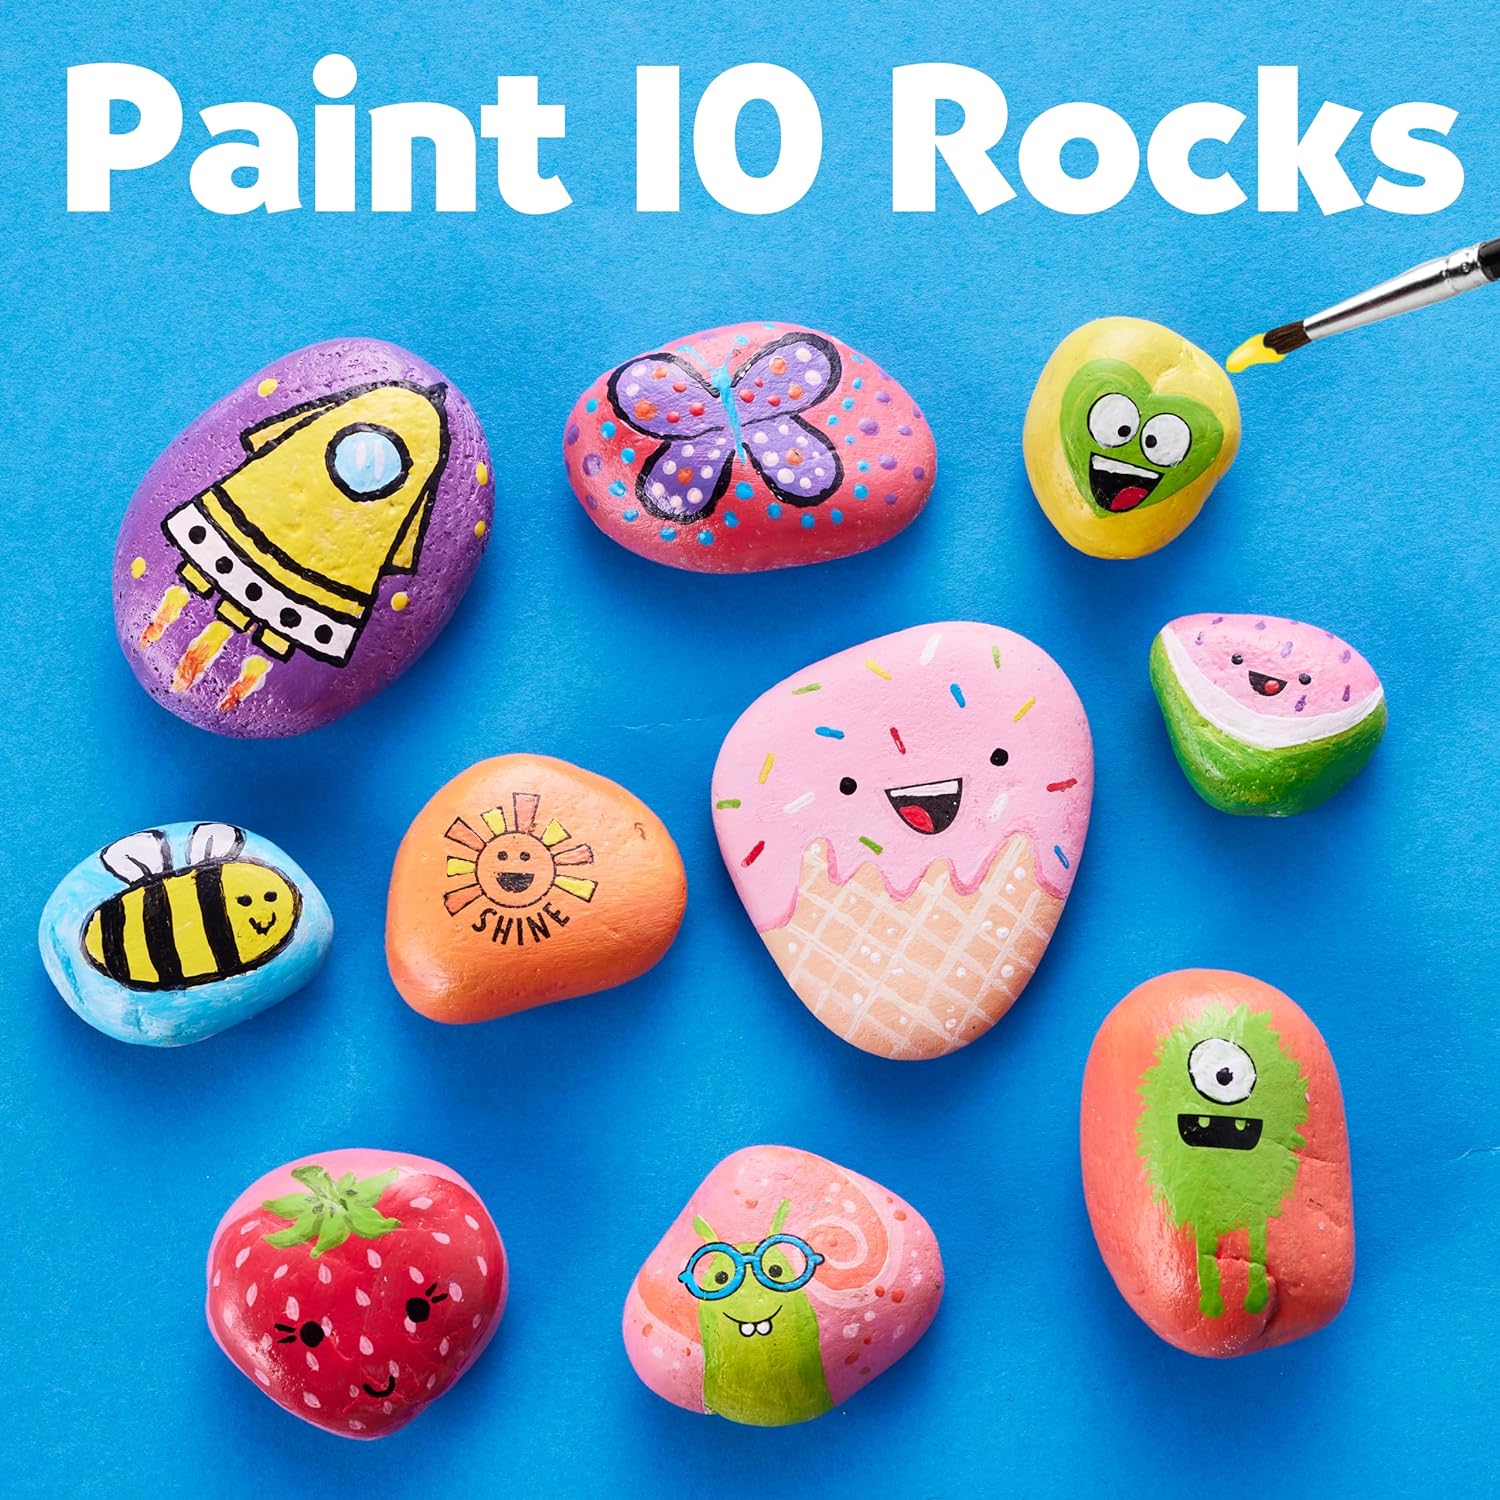 Creativity For Kids Hide and Seek Rock Painting Kit - Arts and Crafts for Kids Ages 6-8+, Gifts for Kids, Craft Kit with 10 Rocks and Waterproof Paint, Small